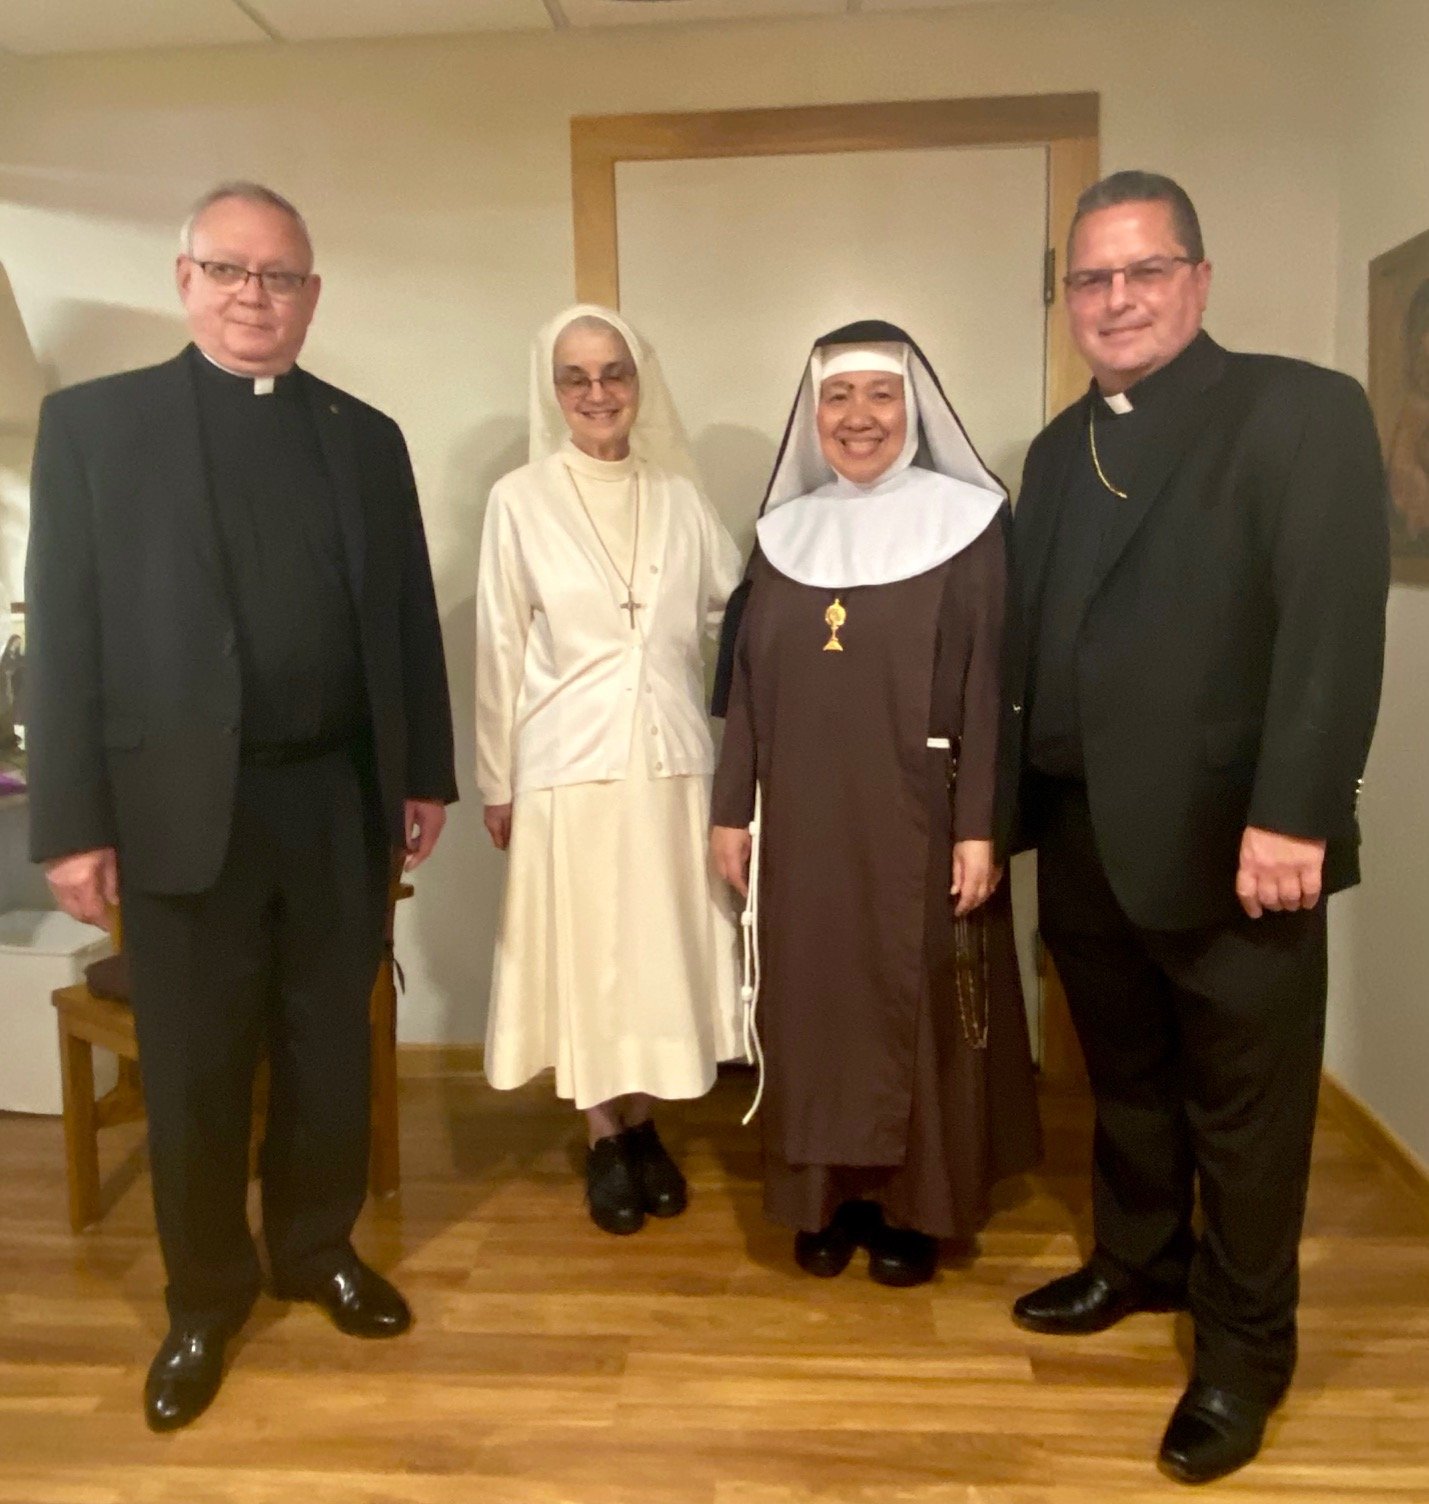 Msgr. Siffrin, Sr. Joyce Candidi (Vicar for Religious), Mother Mary Gertrude, and Bishop David Bonnar